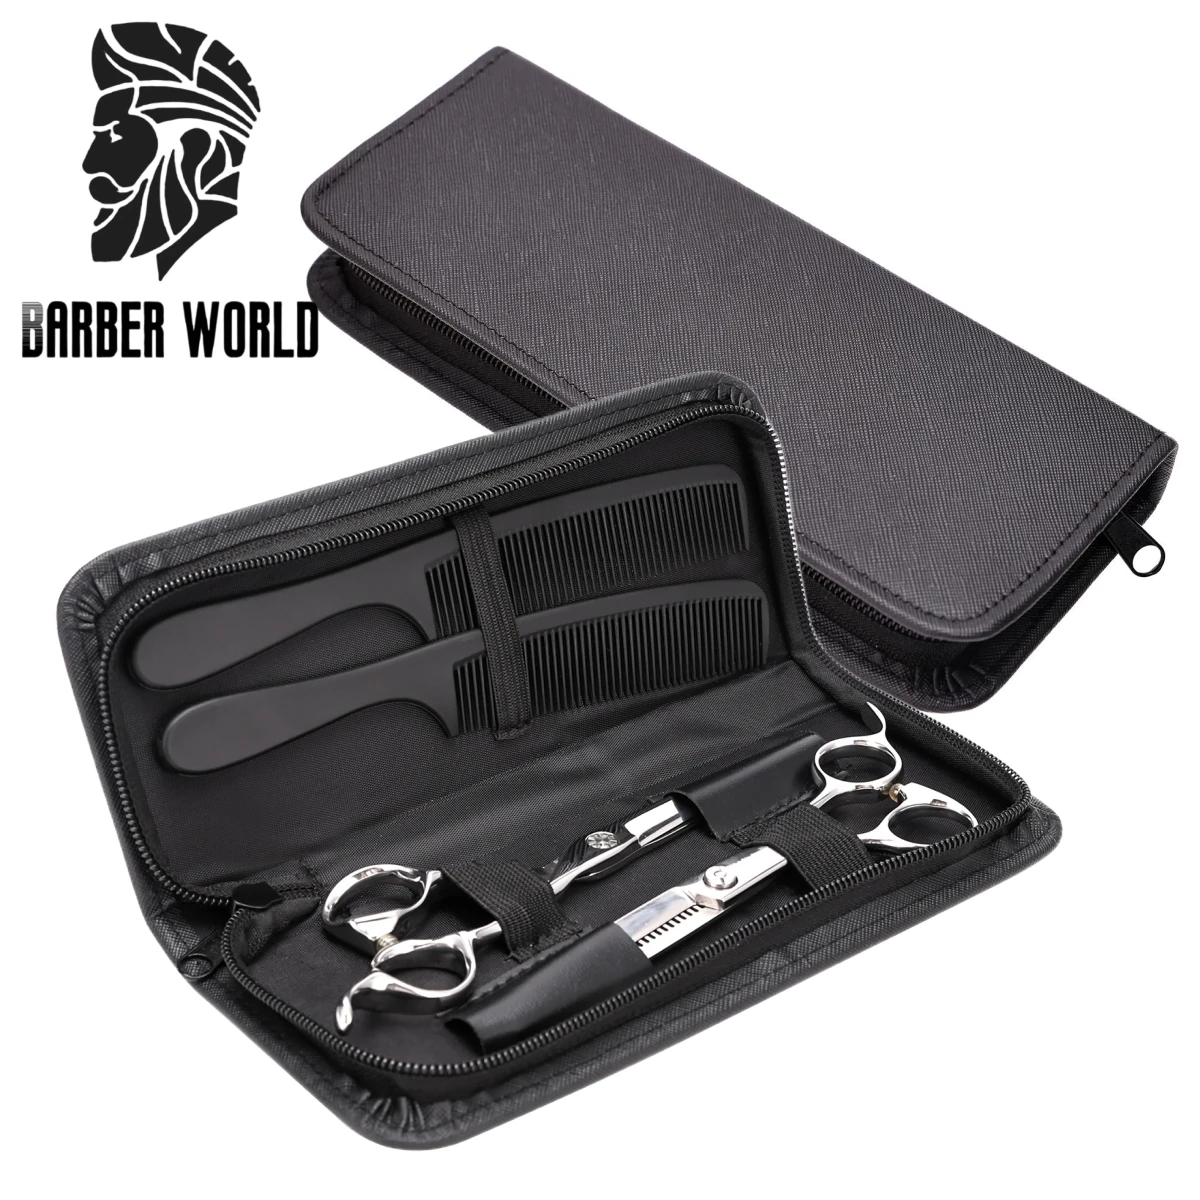 Multifunction Haircut Scissors Bag Professional Salon PU Leather Pouch with Zipper Portable Hairstyling Scissors Storage Case